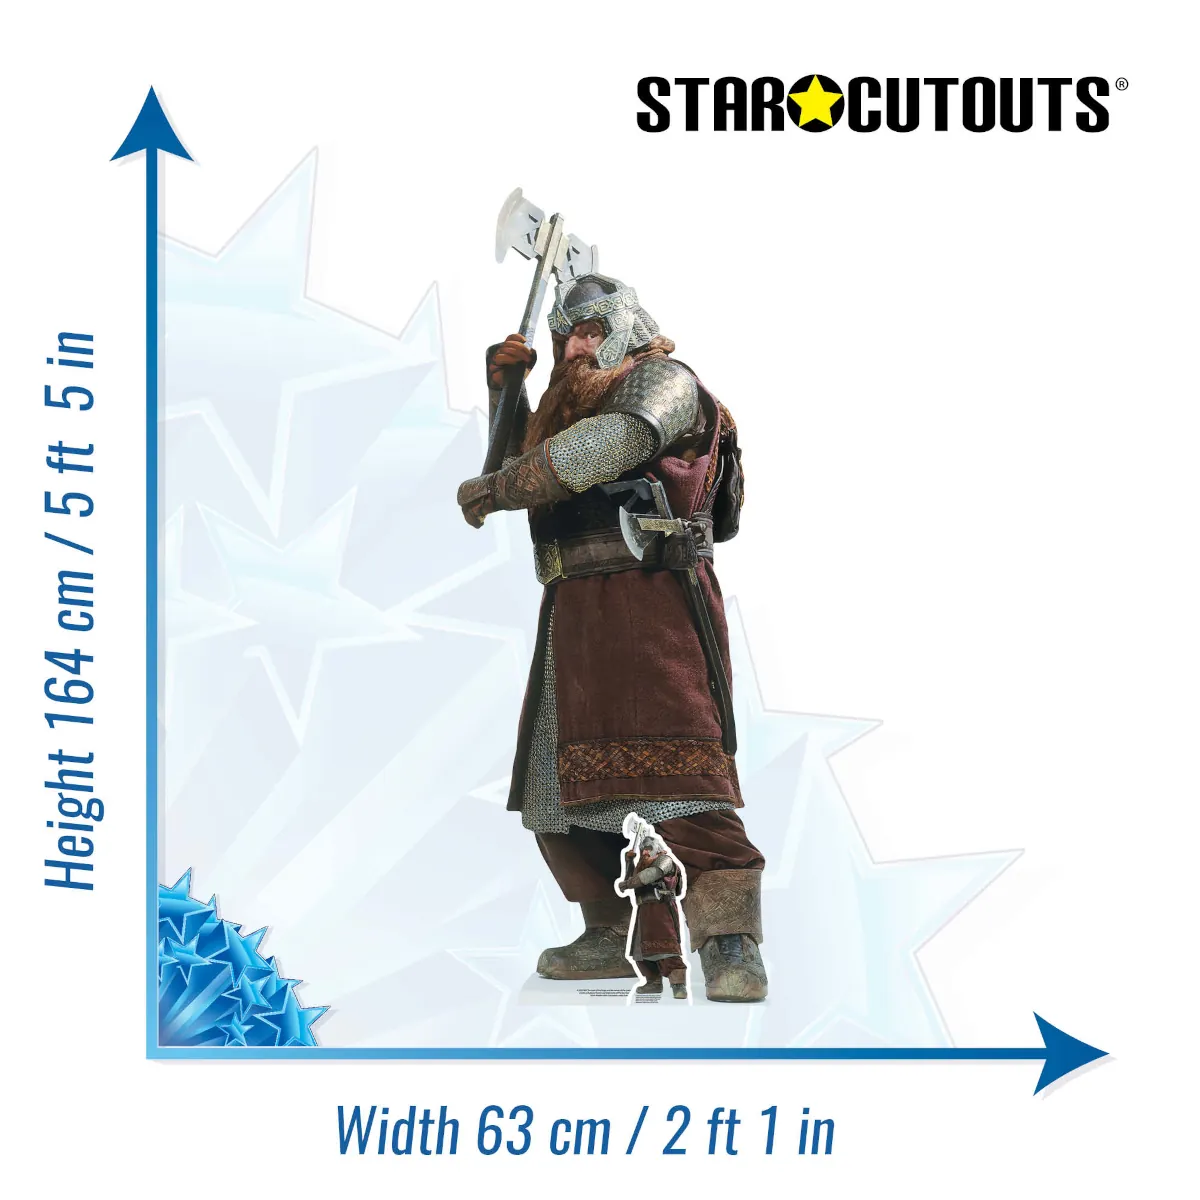 SC4134 Gimli (The Lord of the Rings) Official Lifesize + Mini Cardboard Cutout Standee Size